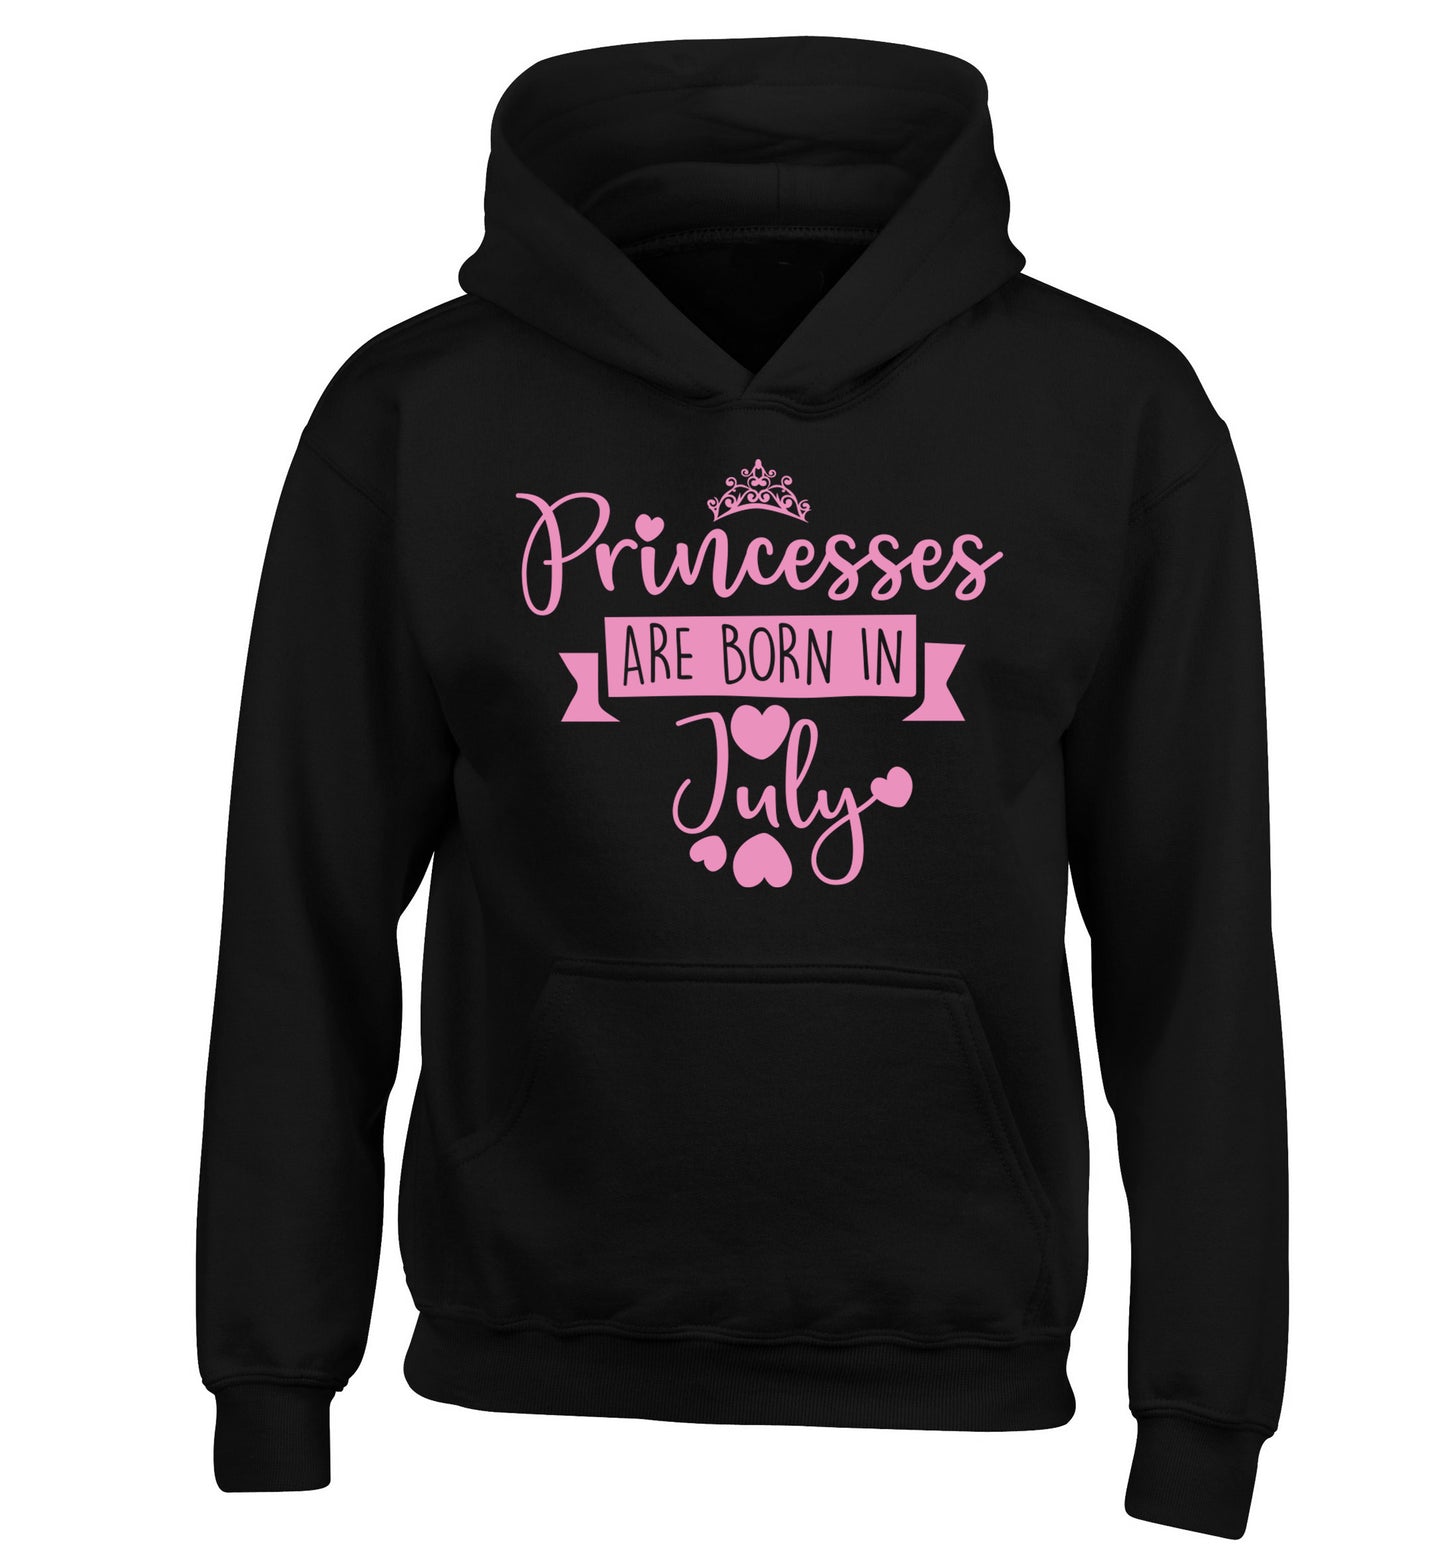 Princesses are born in July children's black hoodie 12-13 Years